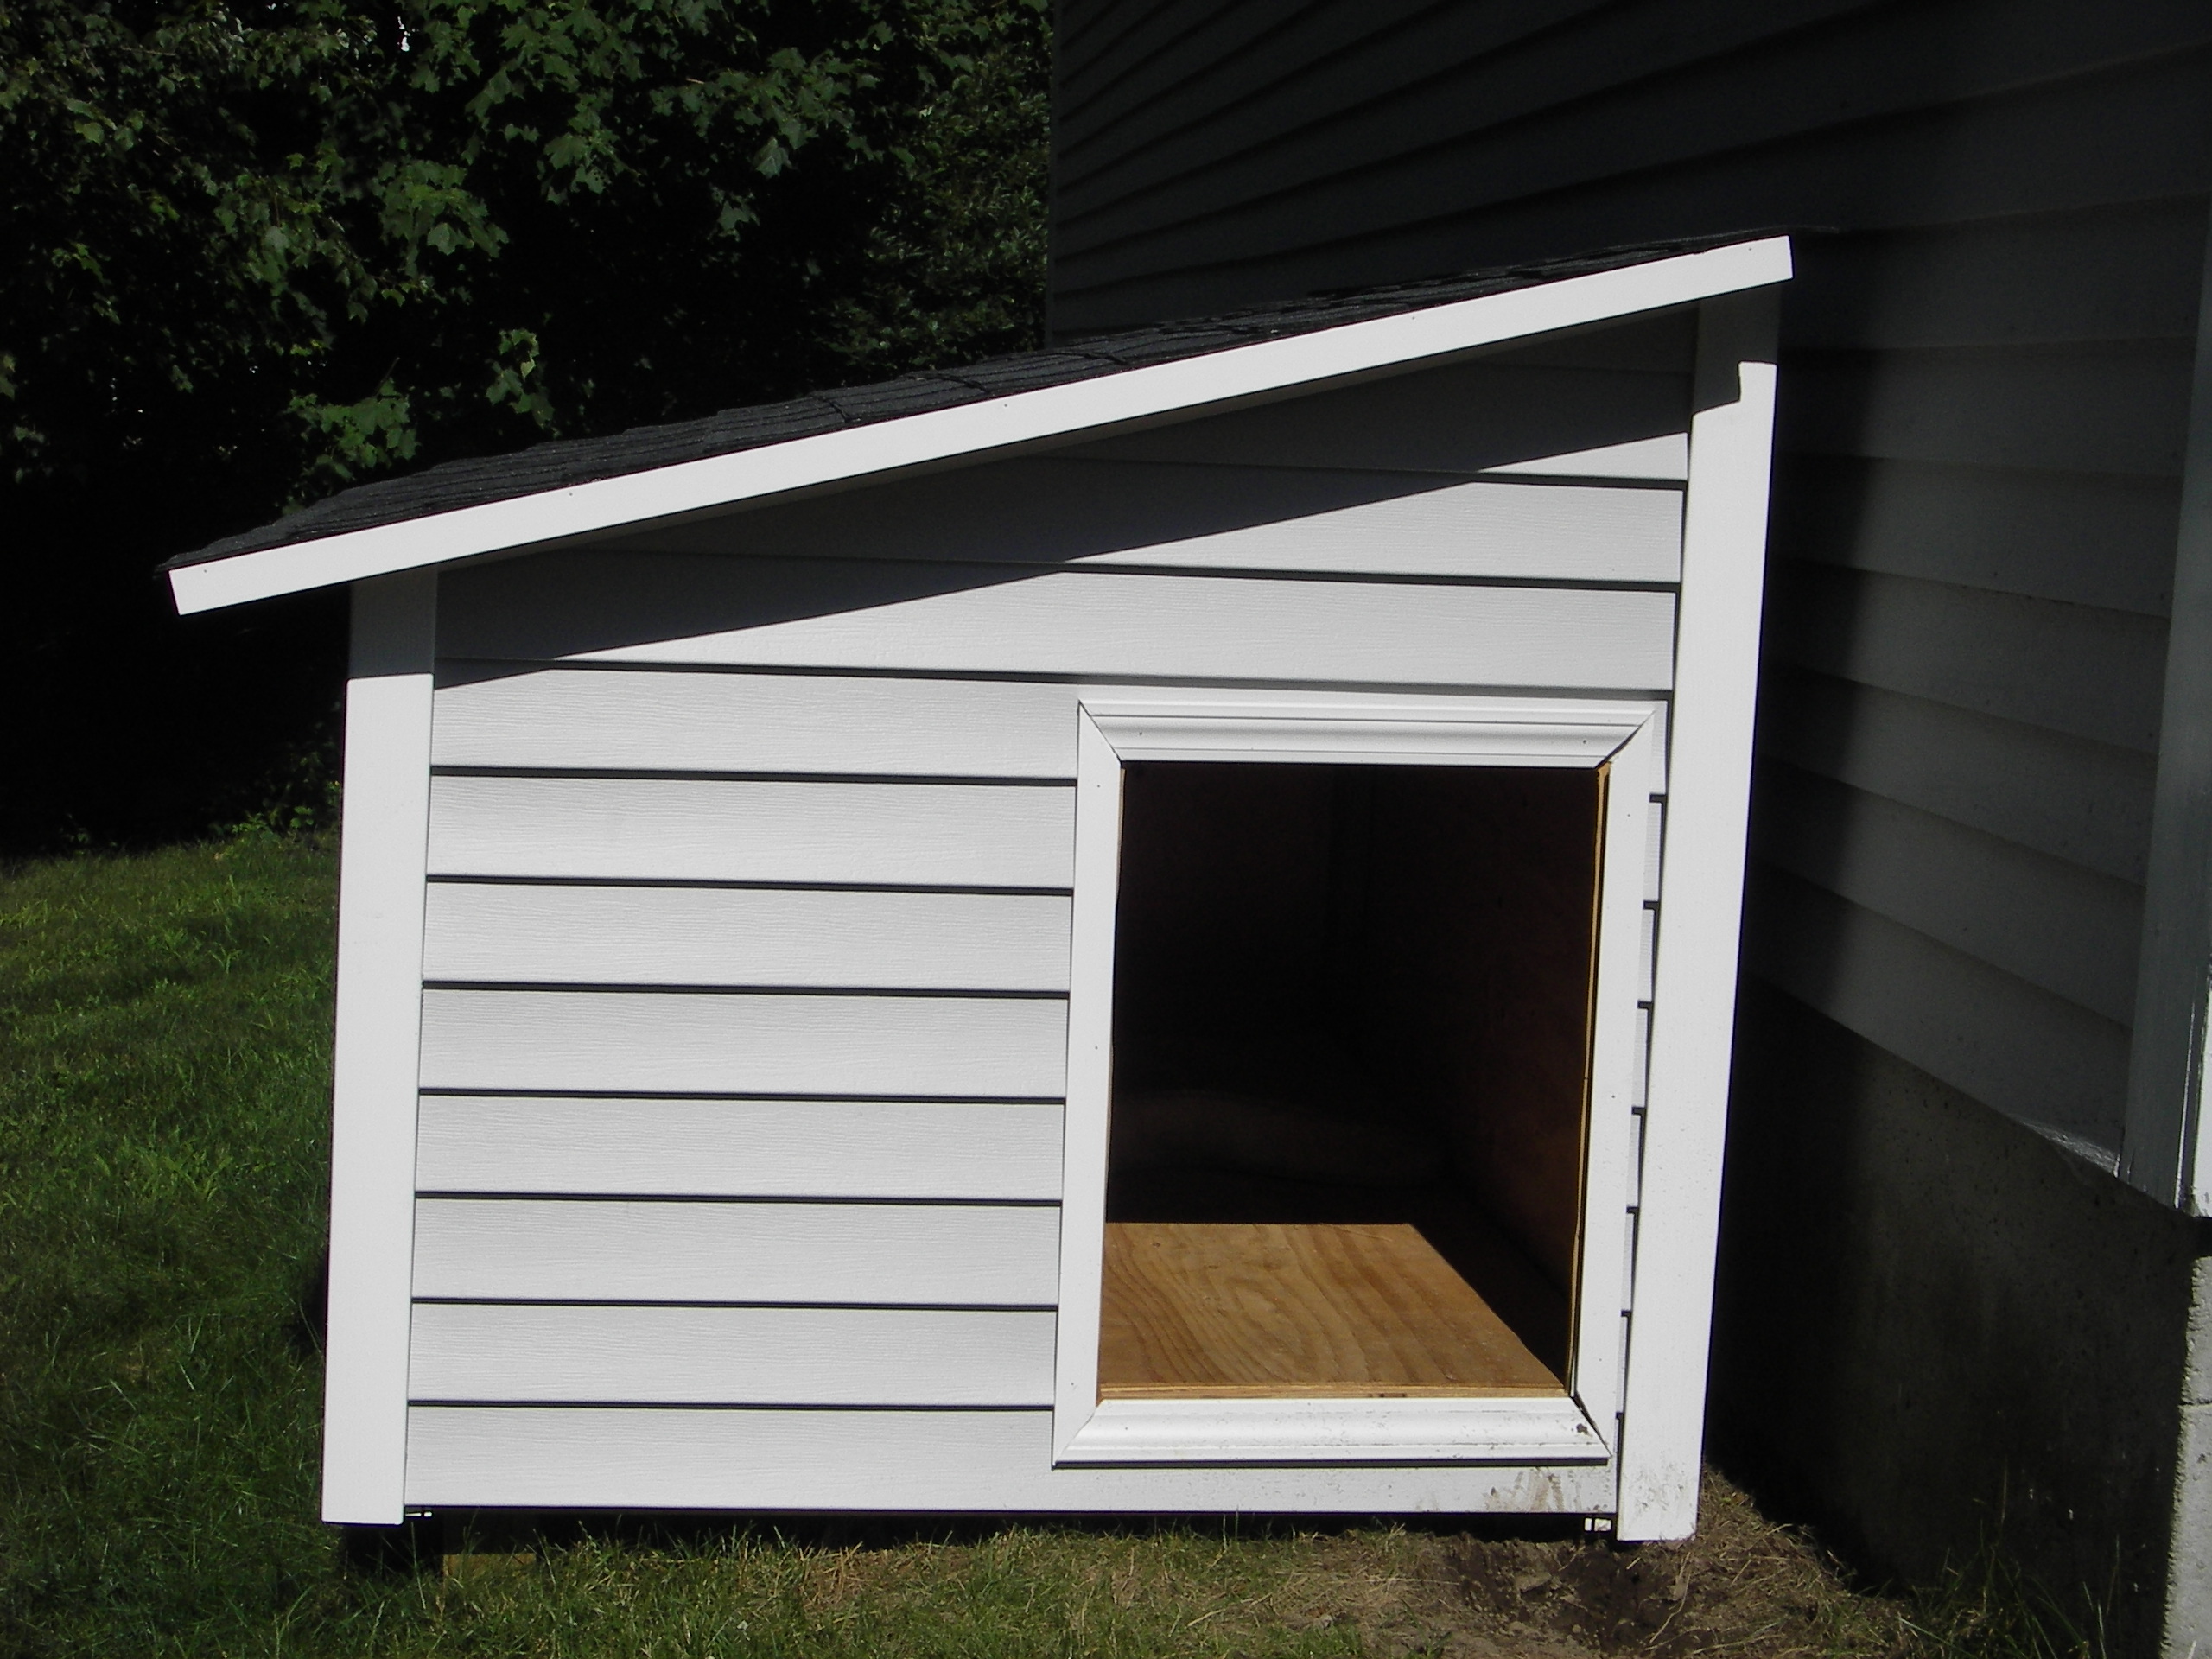 dog house for two large dogs